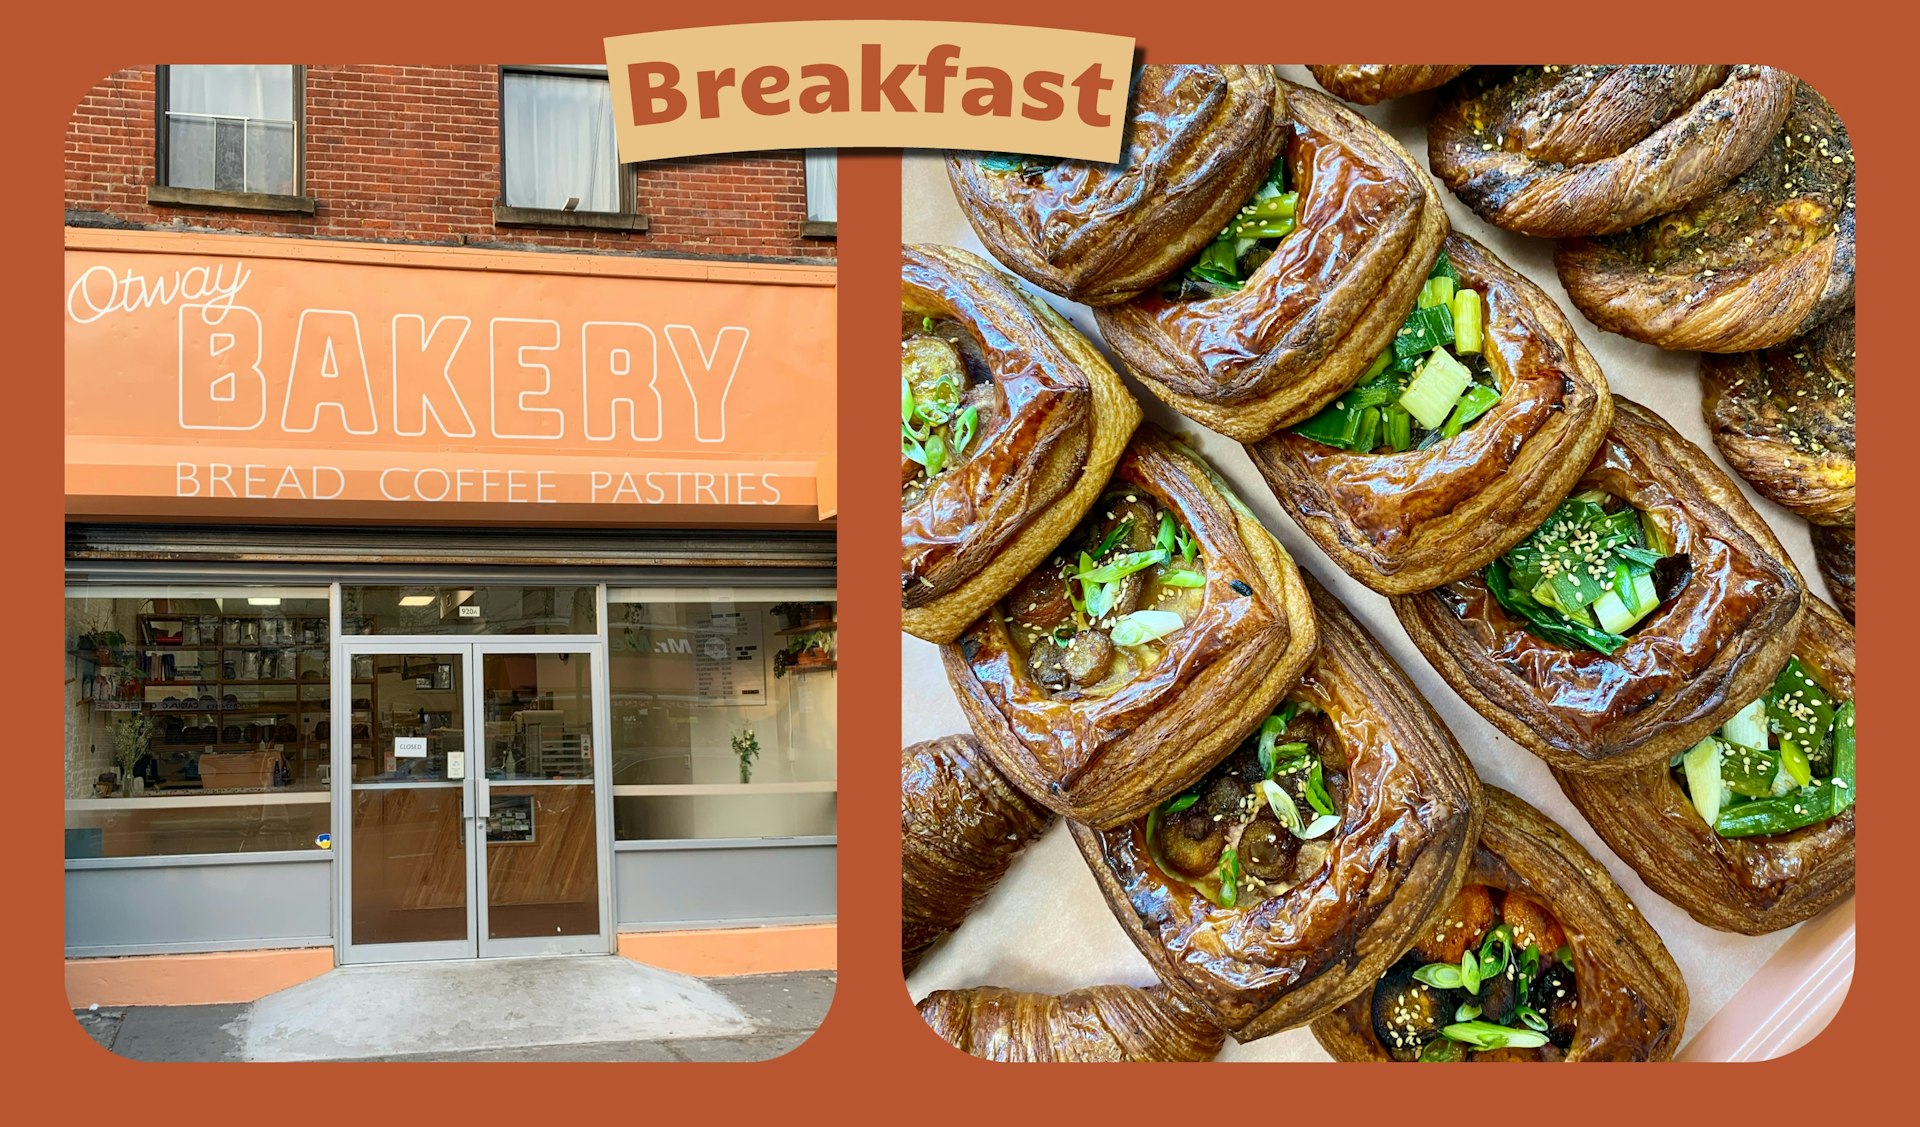 Collage of the Otway Bakery storefront and a spread of the bakery's pastries 